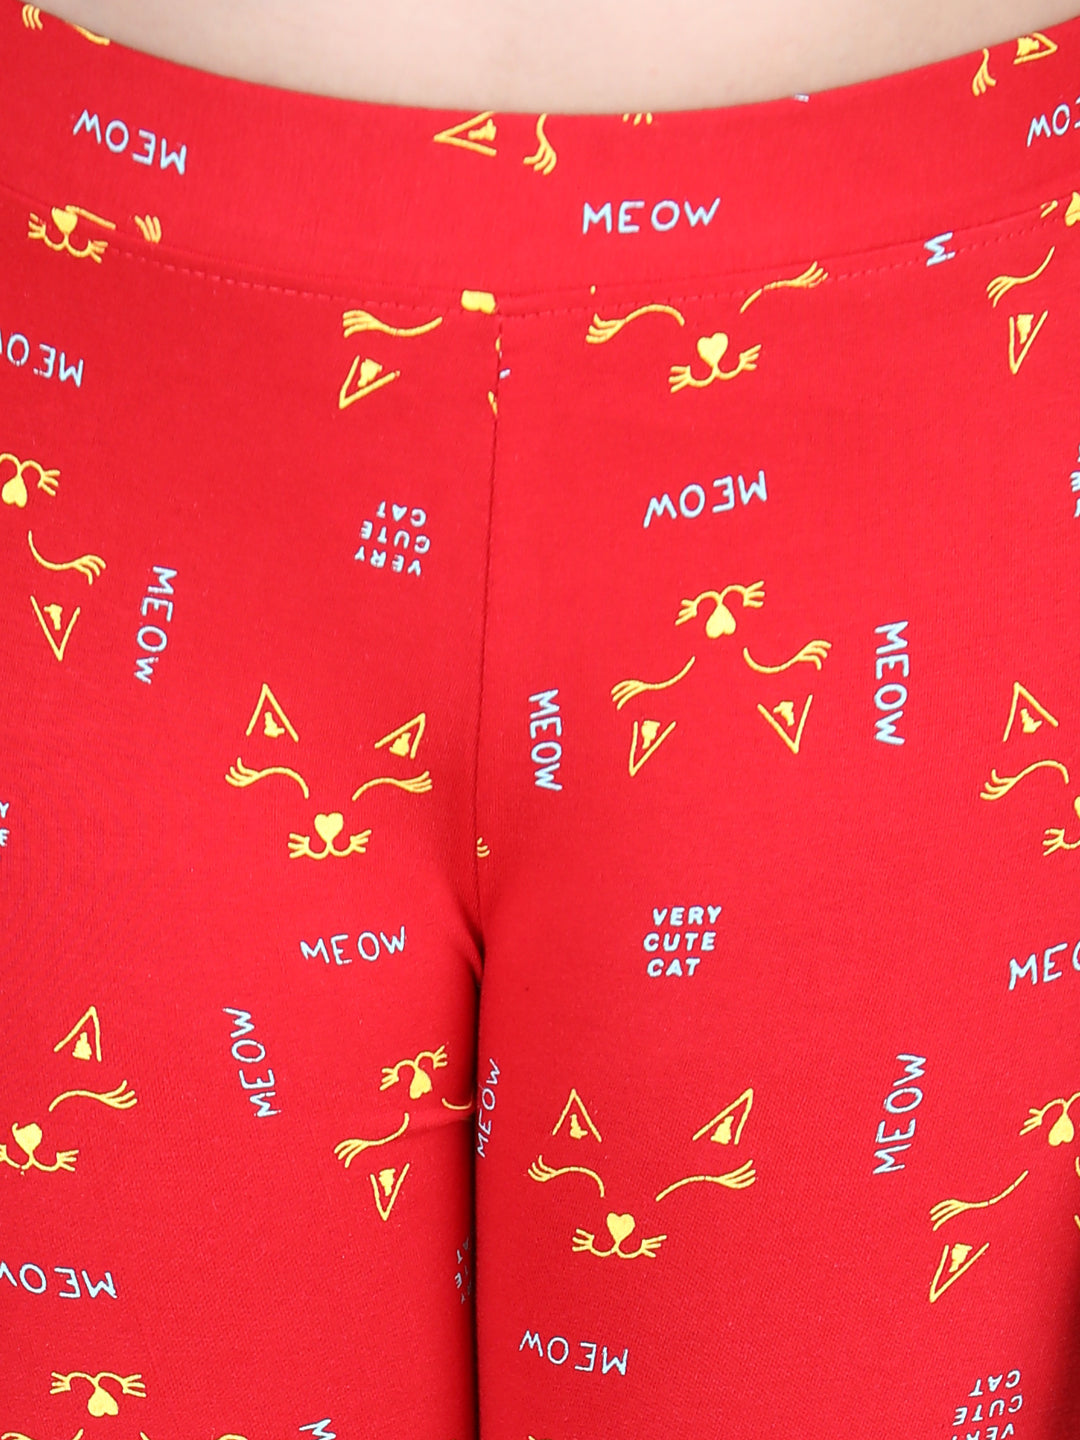 Girls Meow Printed Leggings with Flat Waistband- Red